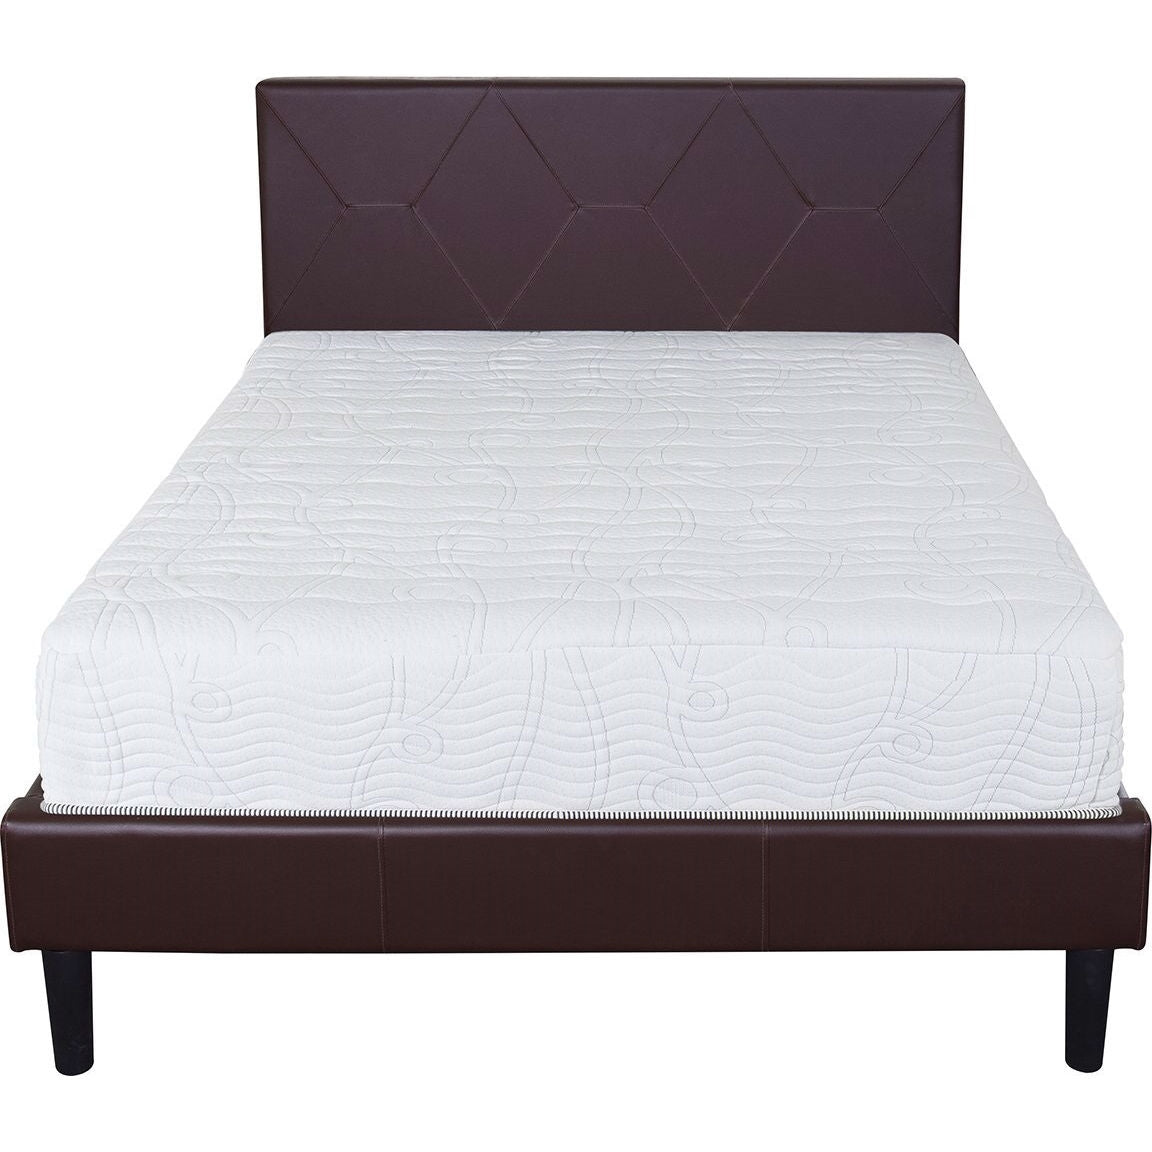 Twin size Innerspring Mattress with Cool Gel Memory Foam Layer